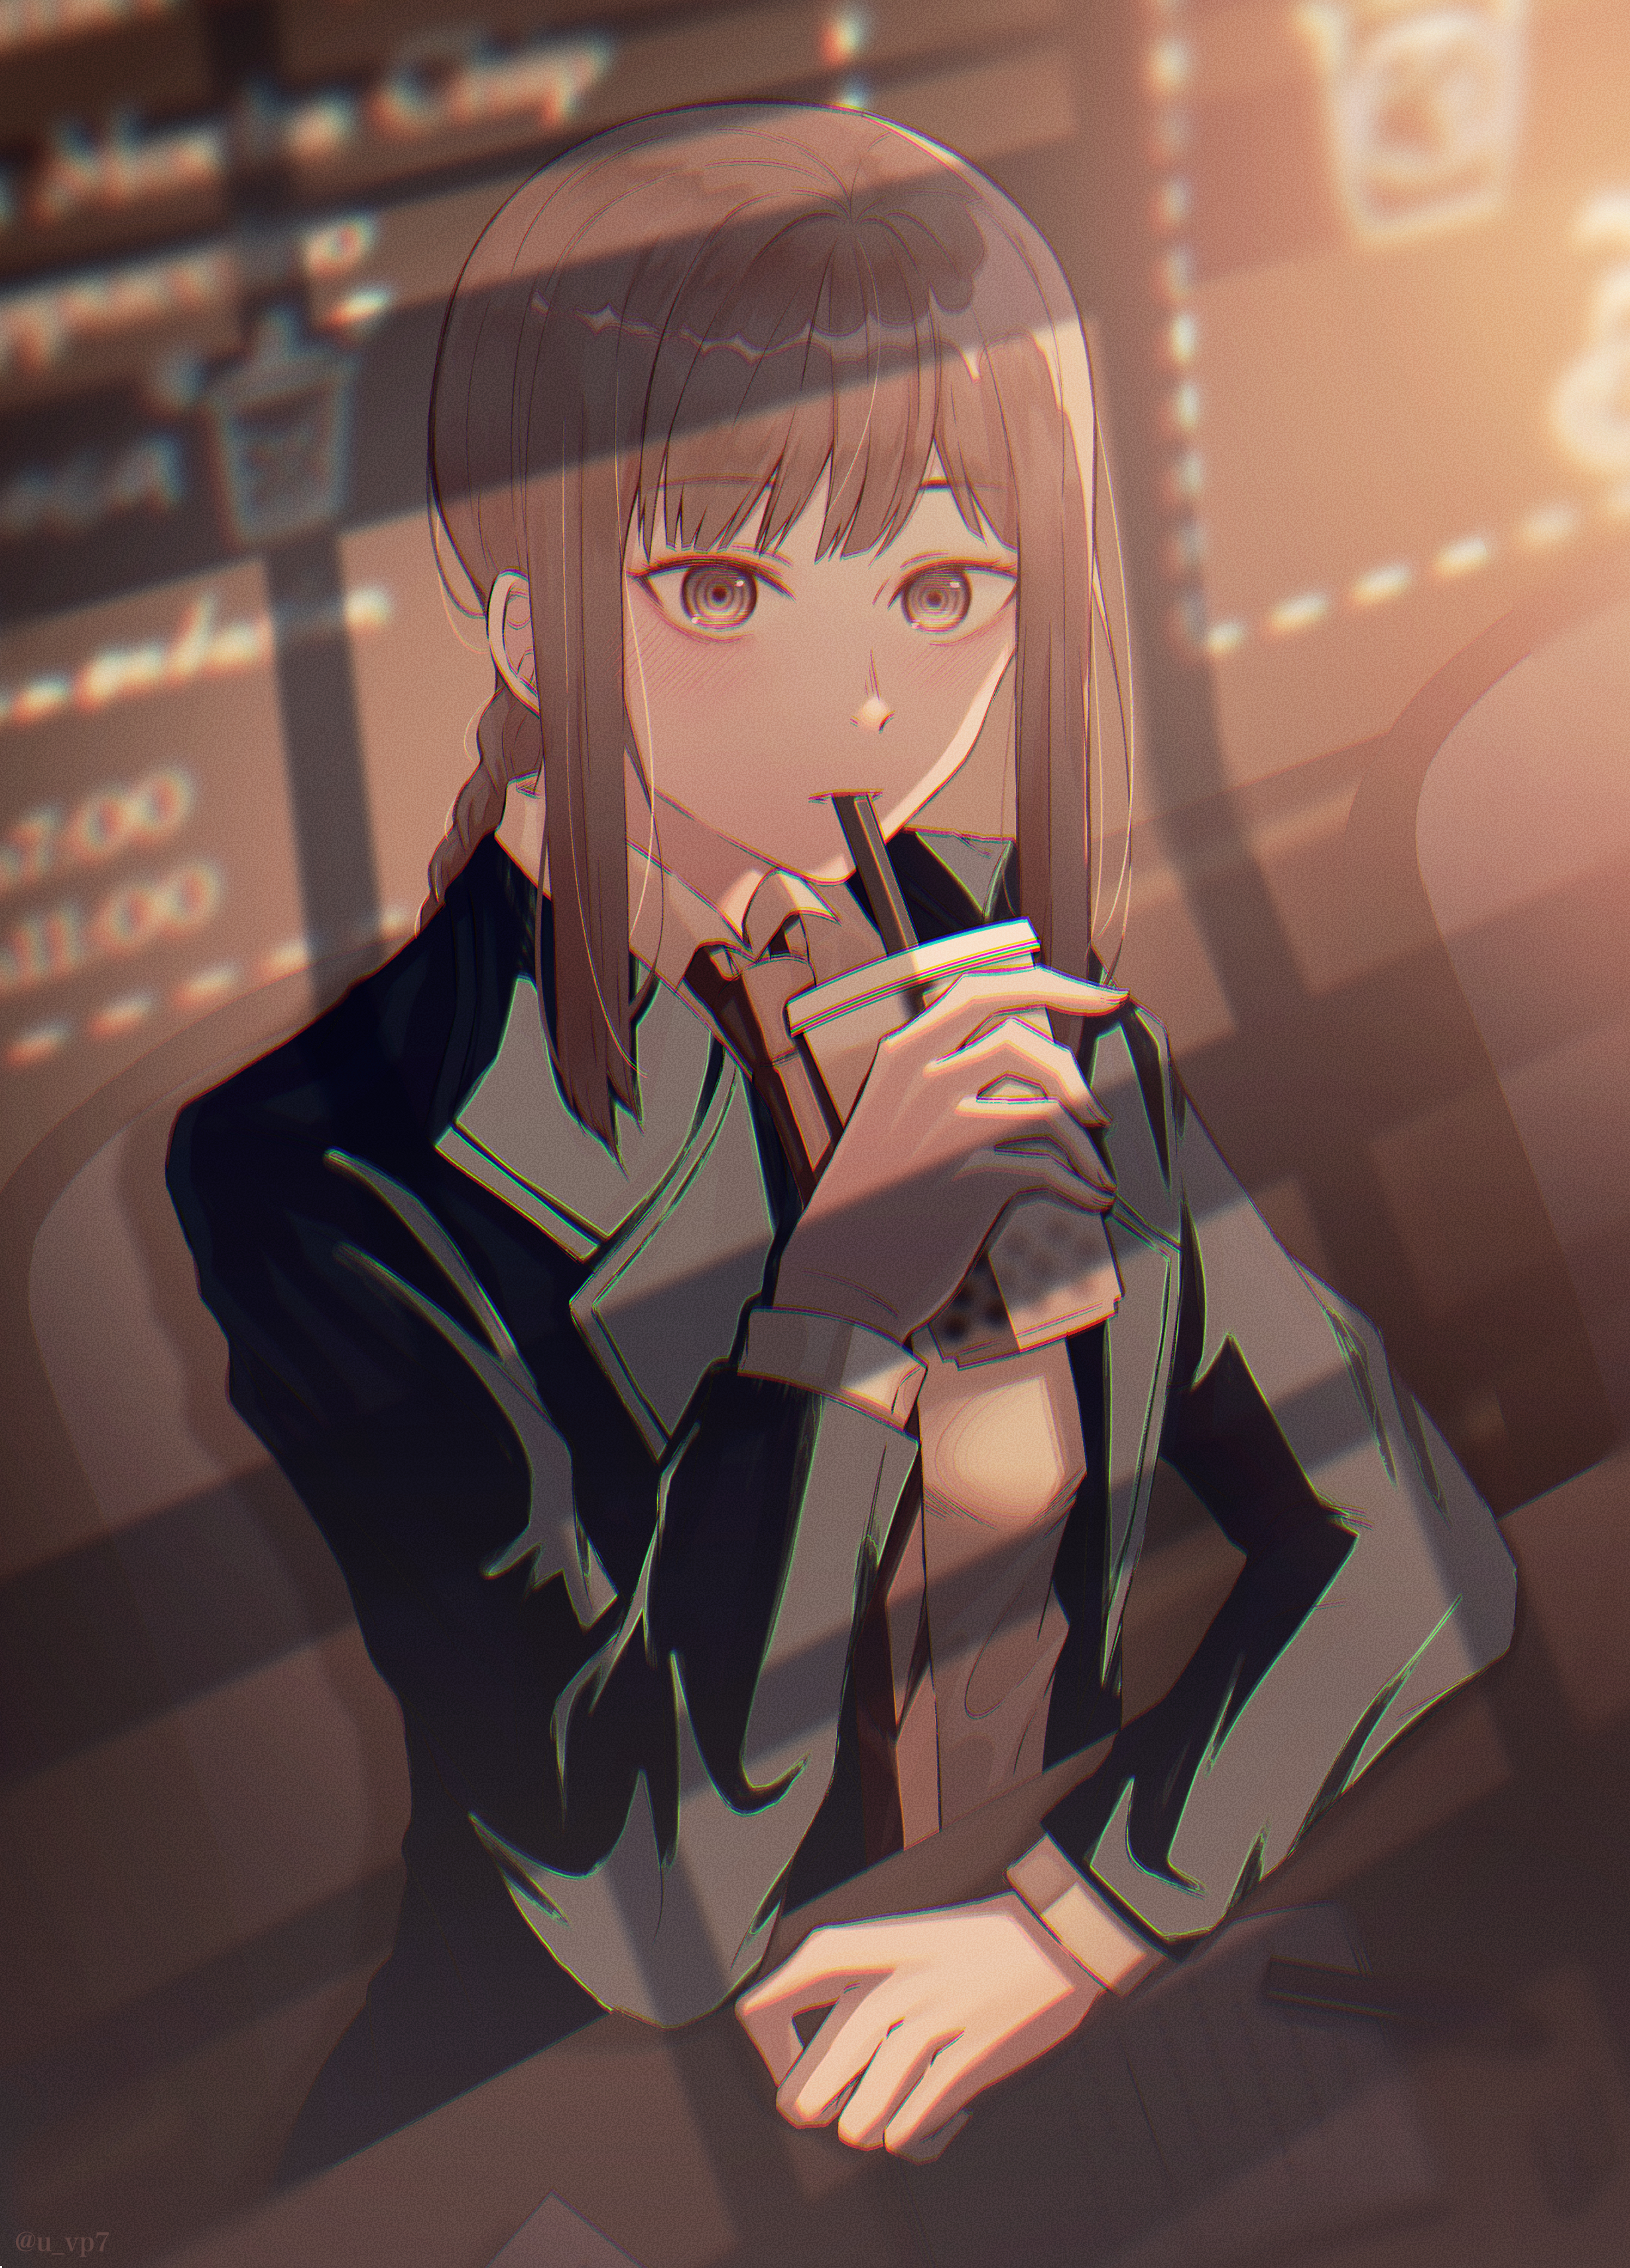 Anime 2458x3420 Chainsaw Man manga Makima (Chainsaw Man) artwork tie anime anime girls face drinking brunette drawing ringed eyes drinking straw long hair brown eyes portrait display suit and tie natural light